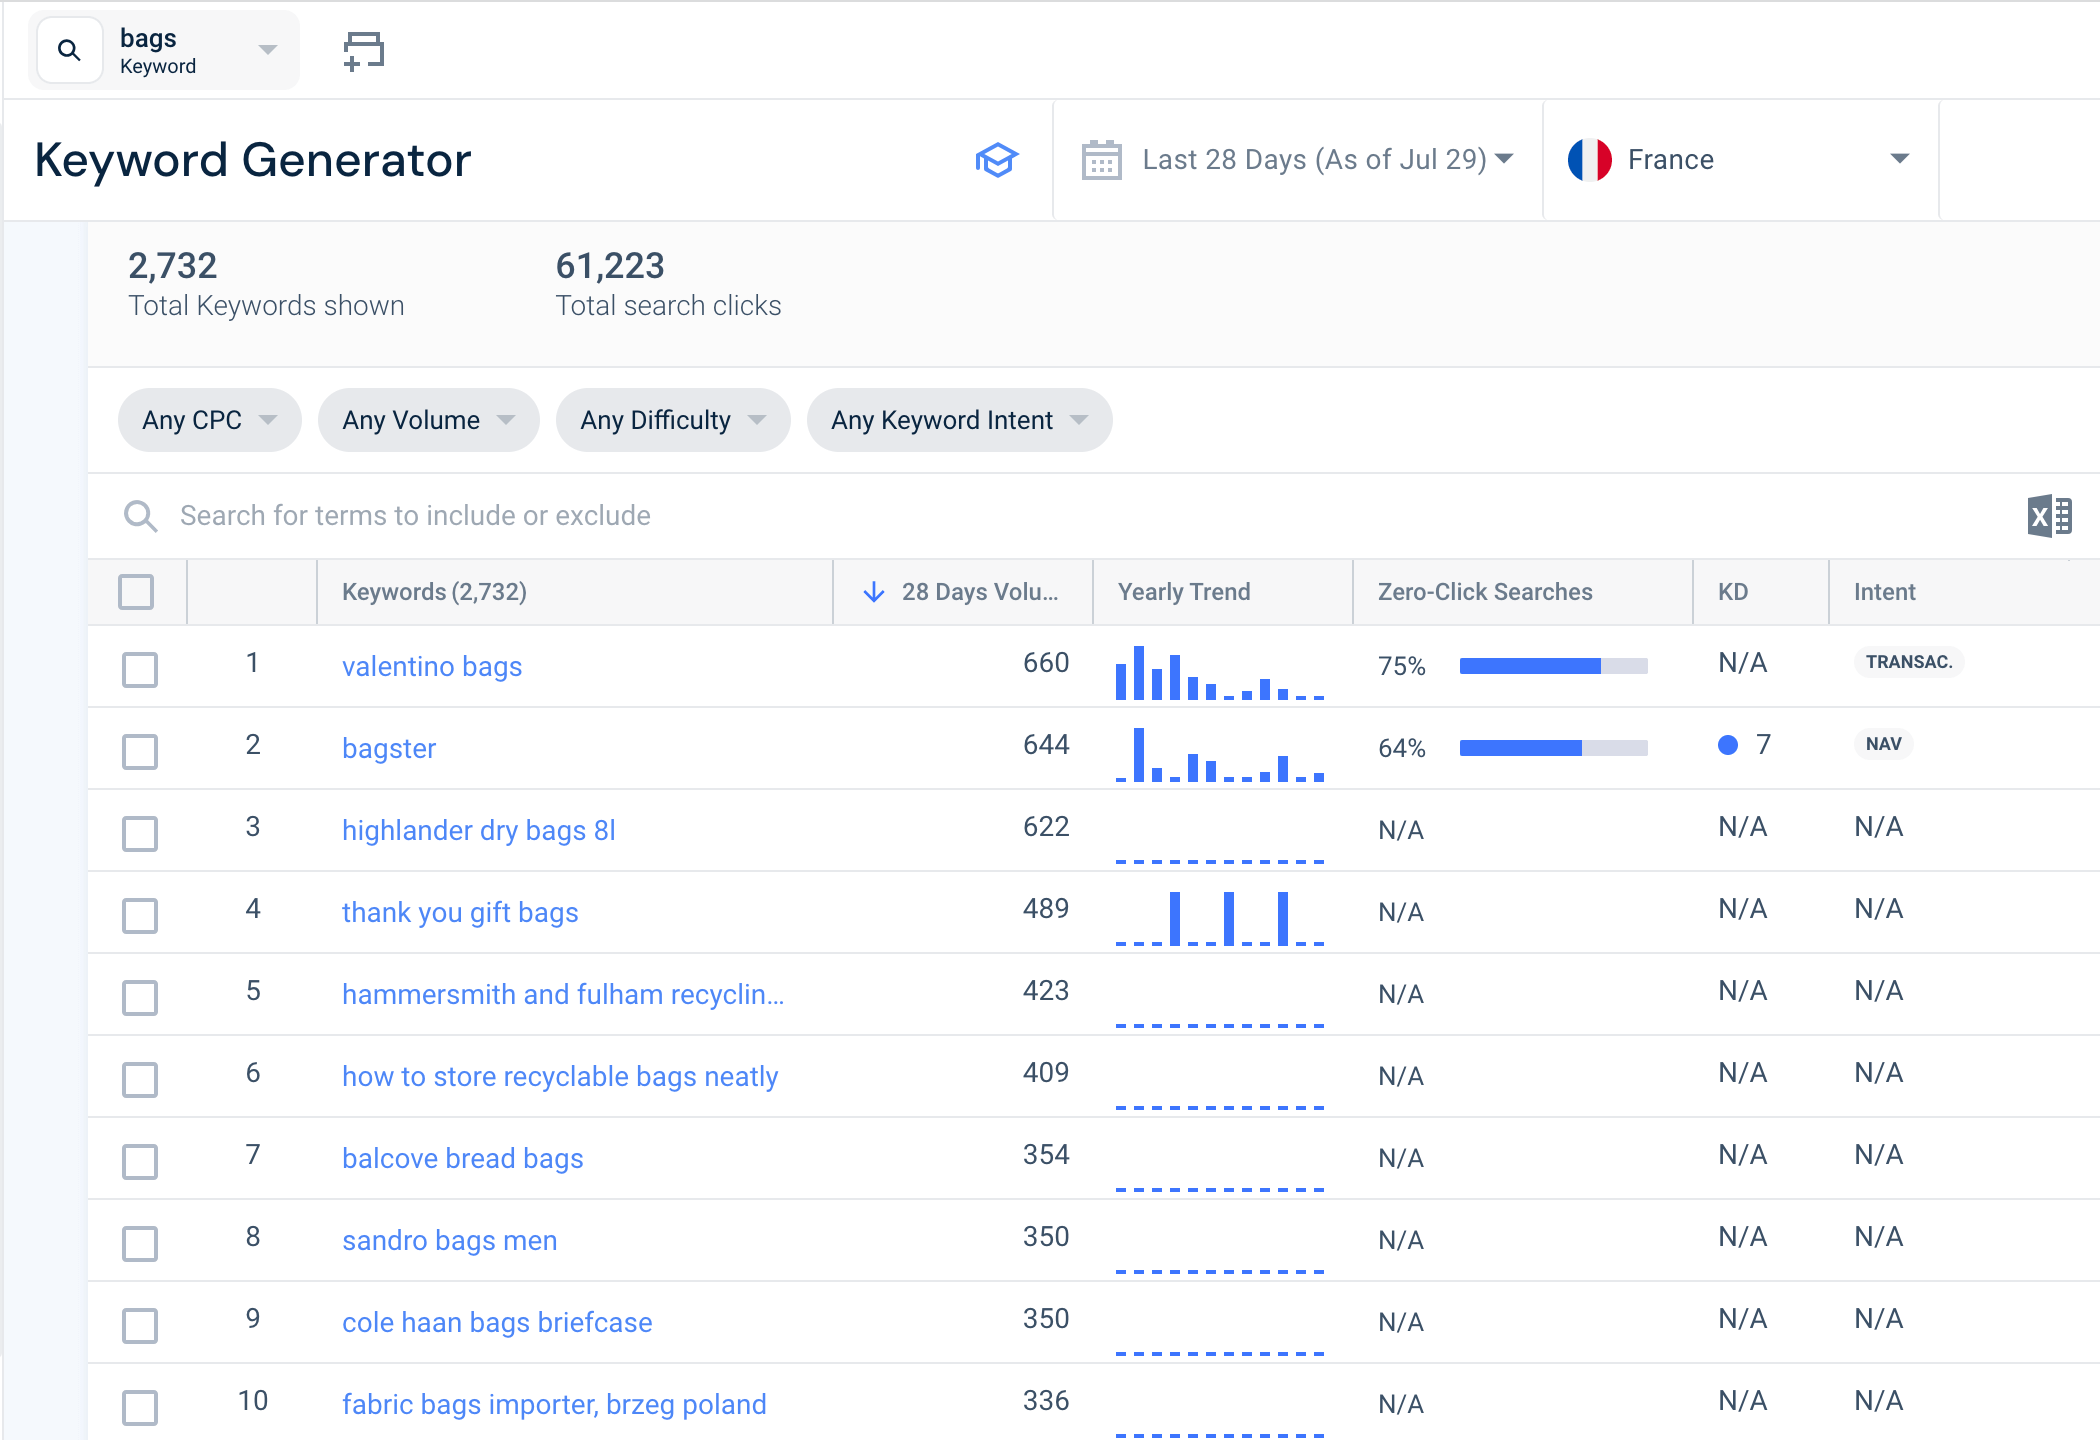 Similaweb’s fresh keyword insights can be filtered by countries for new market expansion